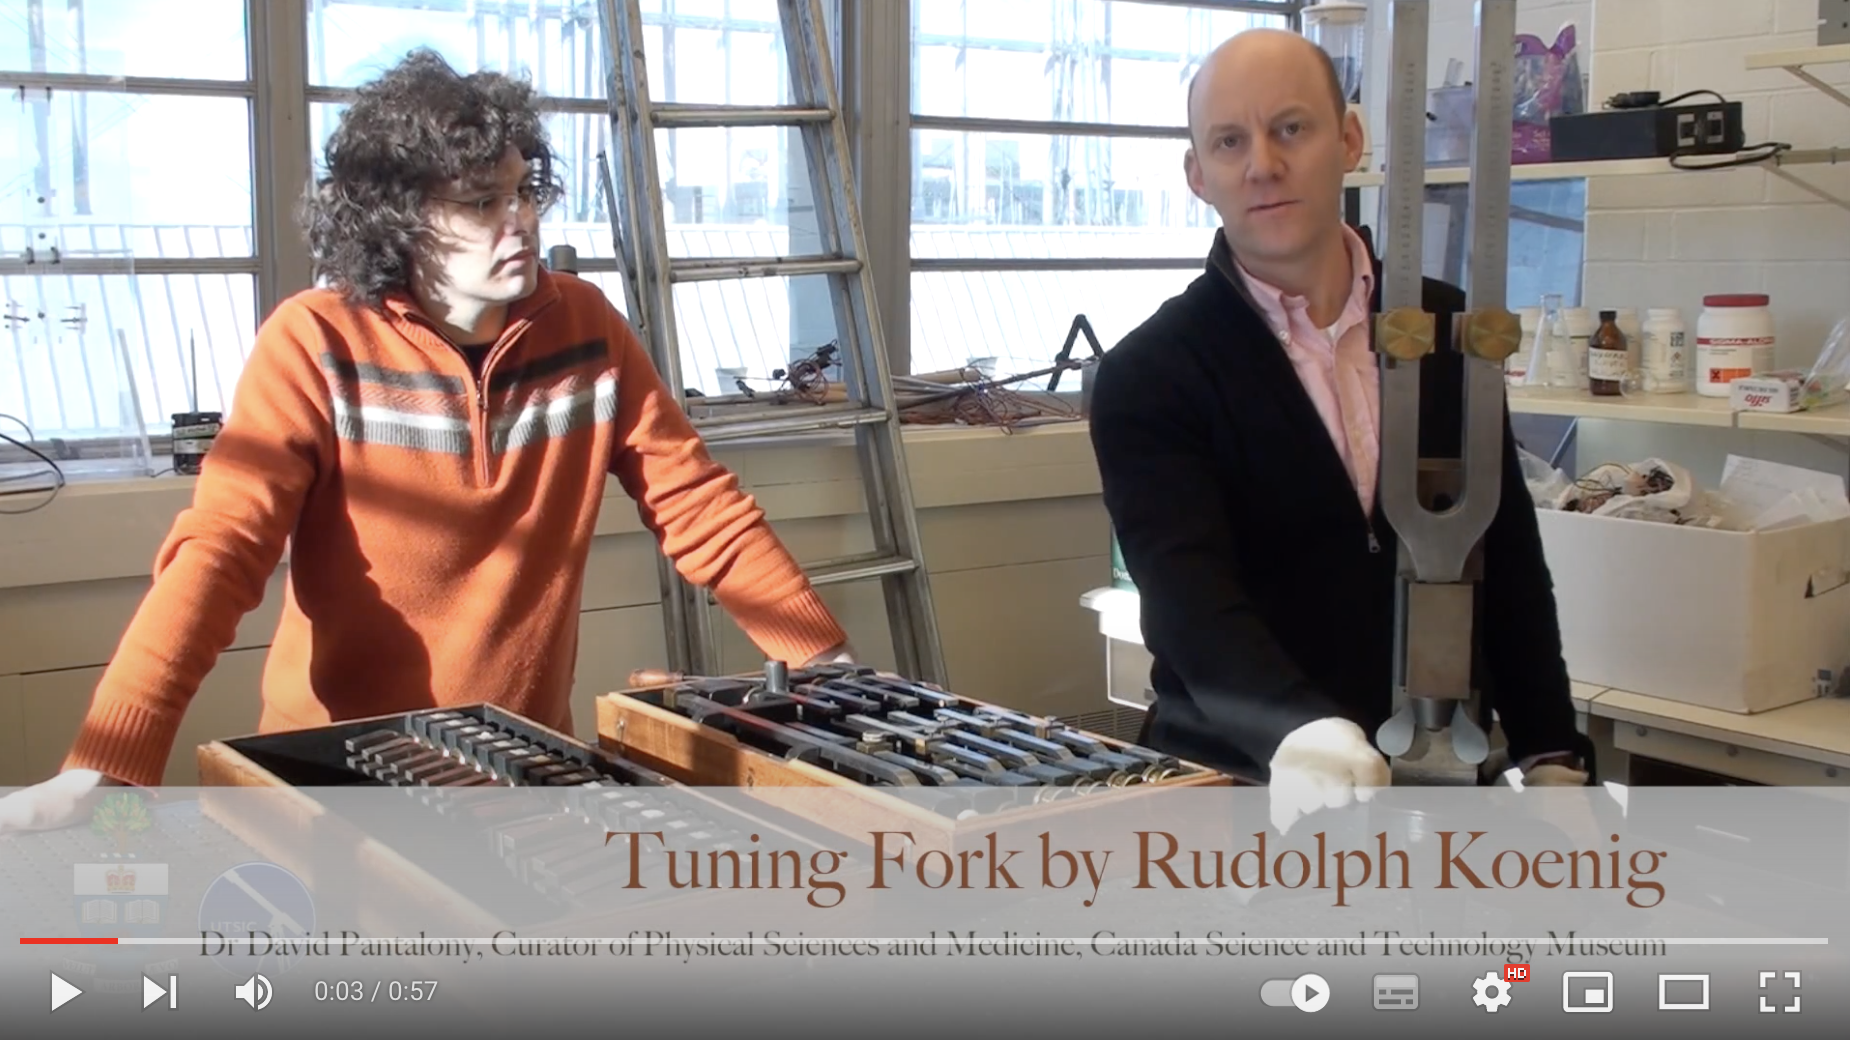 The history of the tuning forks in the Koenig collection